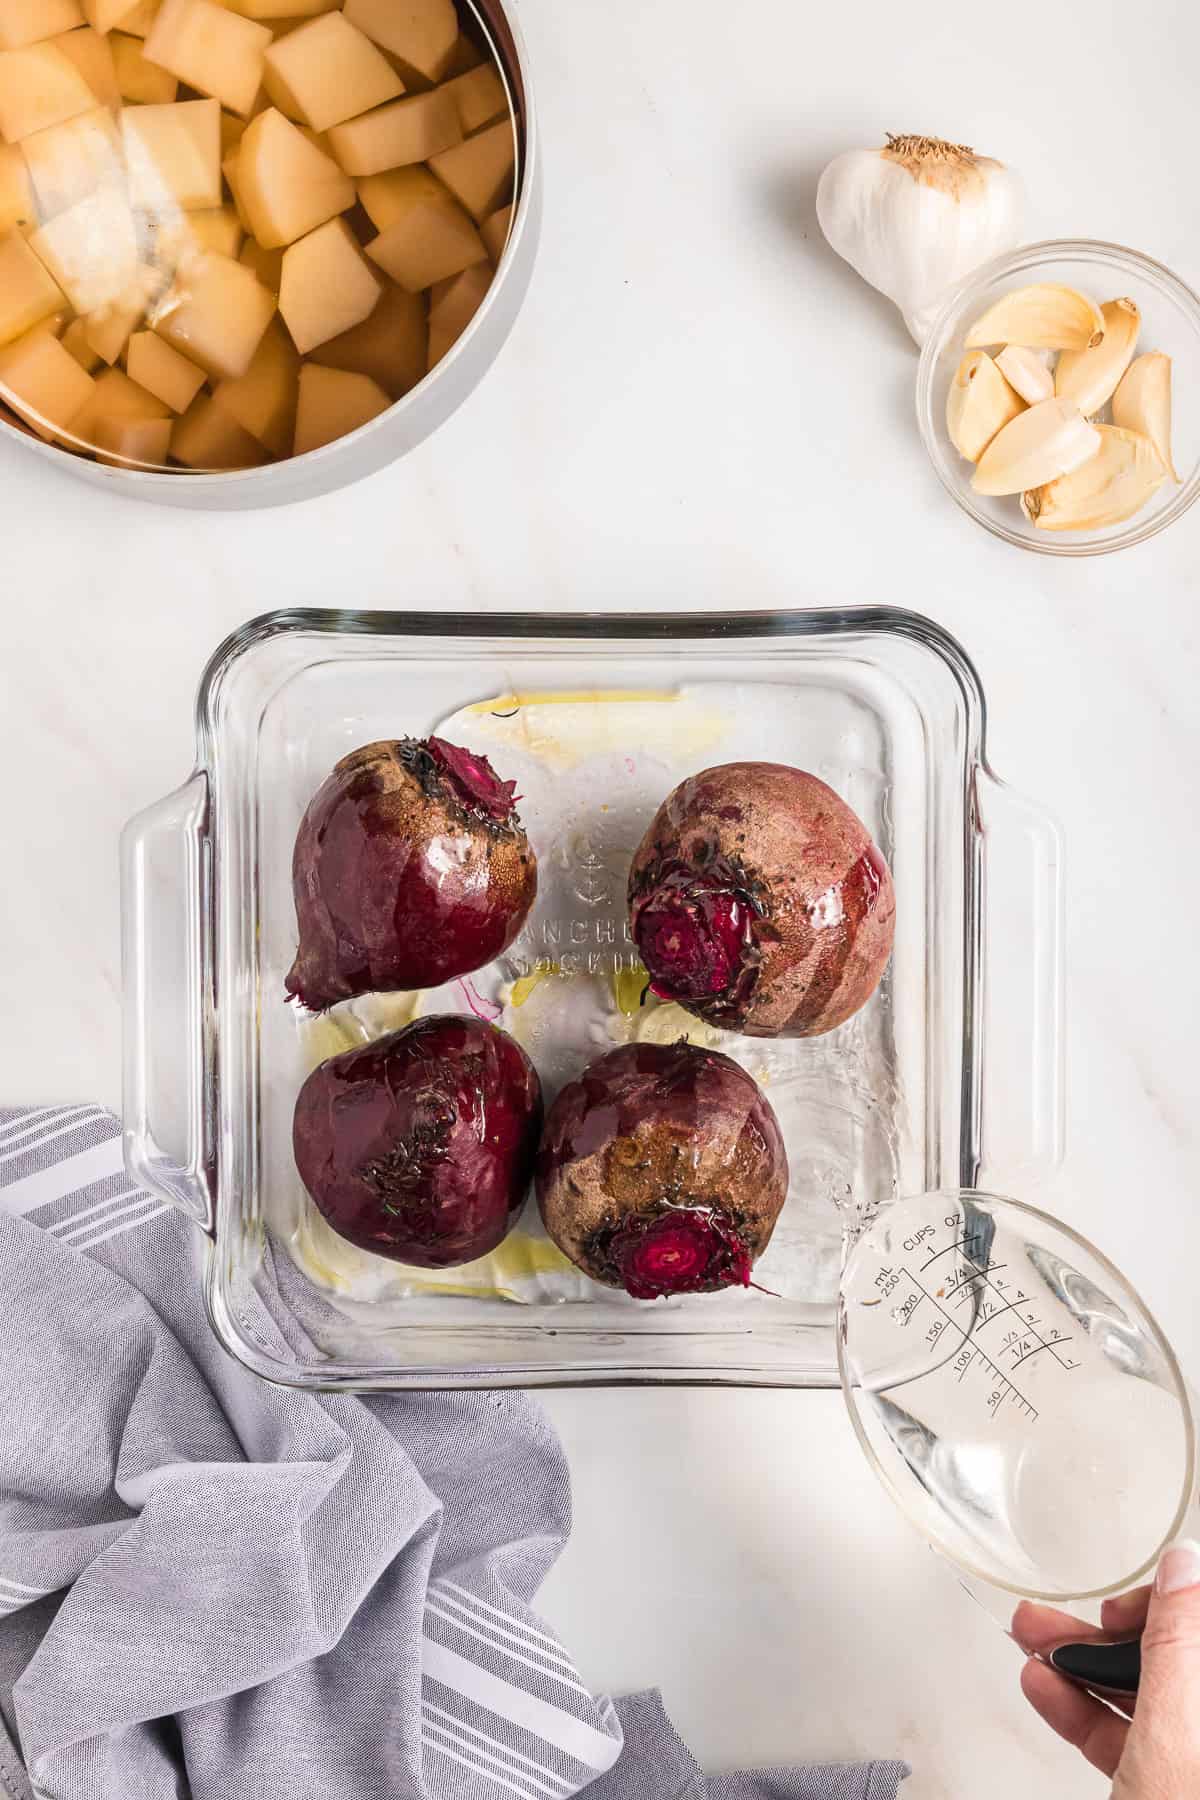 Prepping beets for roasting in the oven in a glass dish.